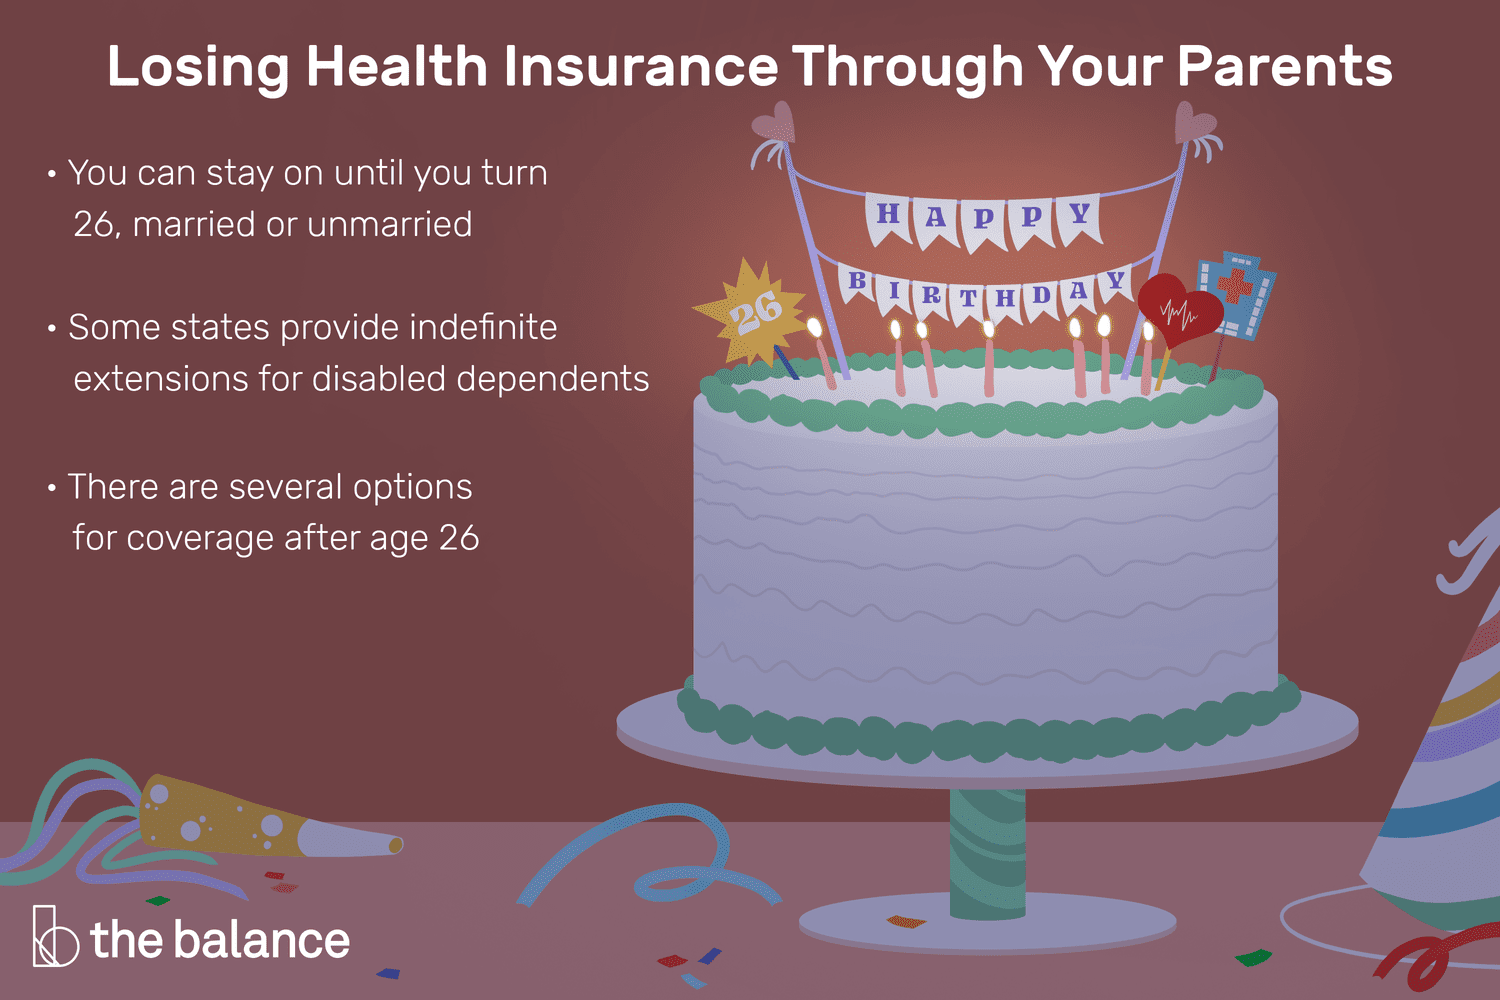 how long can you stay on your parents health insurance?